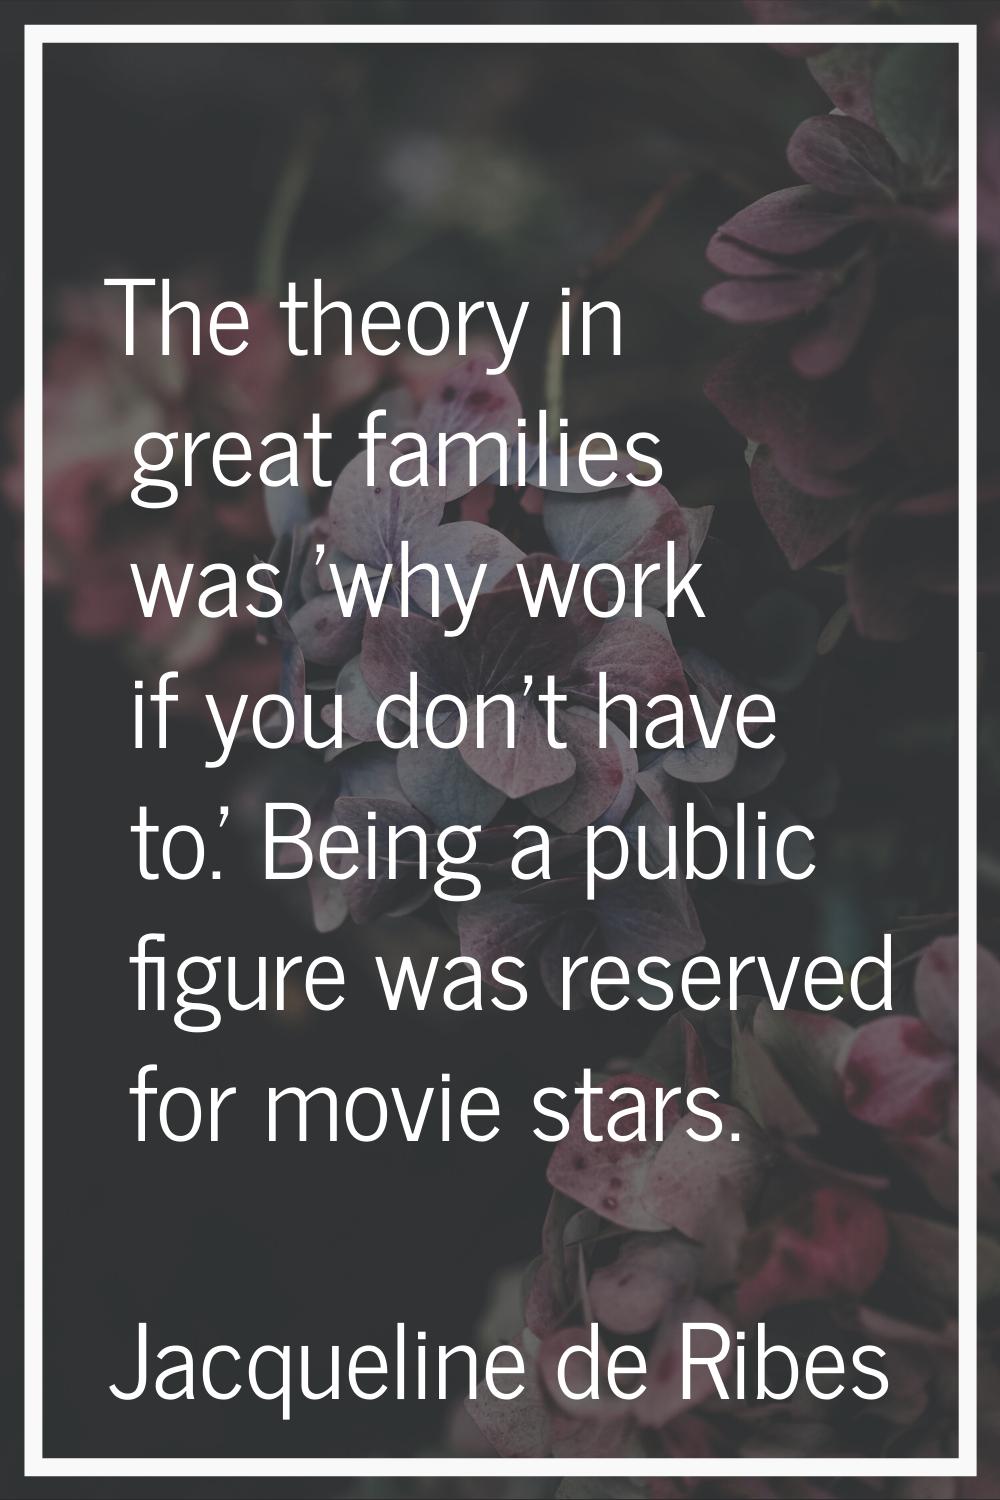 The theory in great families was 'why work if you don't have to.' Being a public figure was reserve